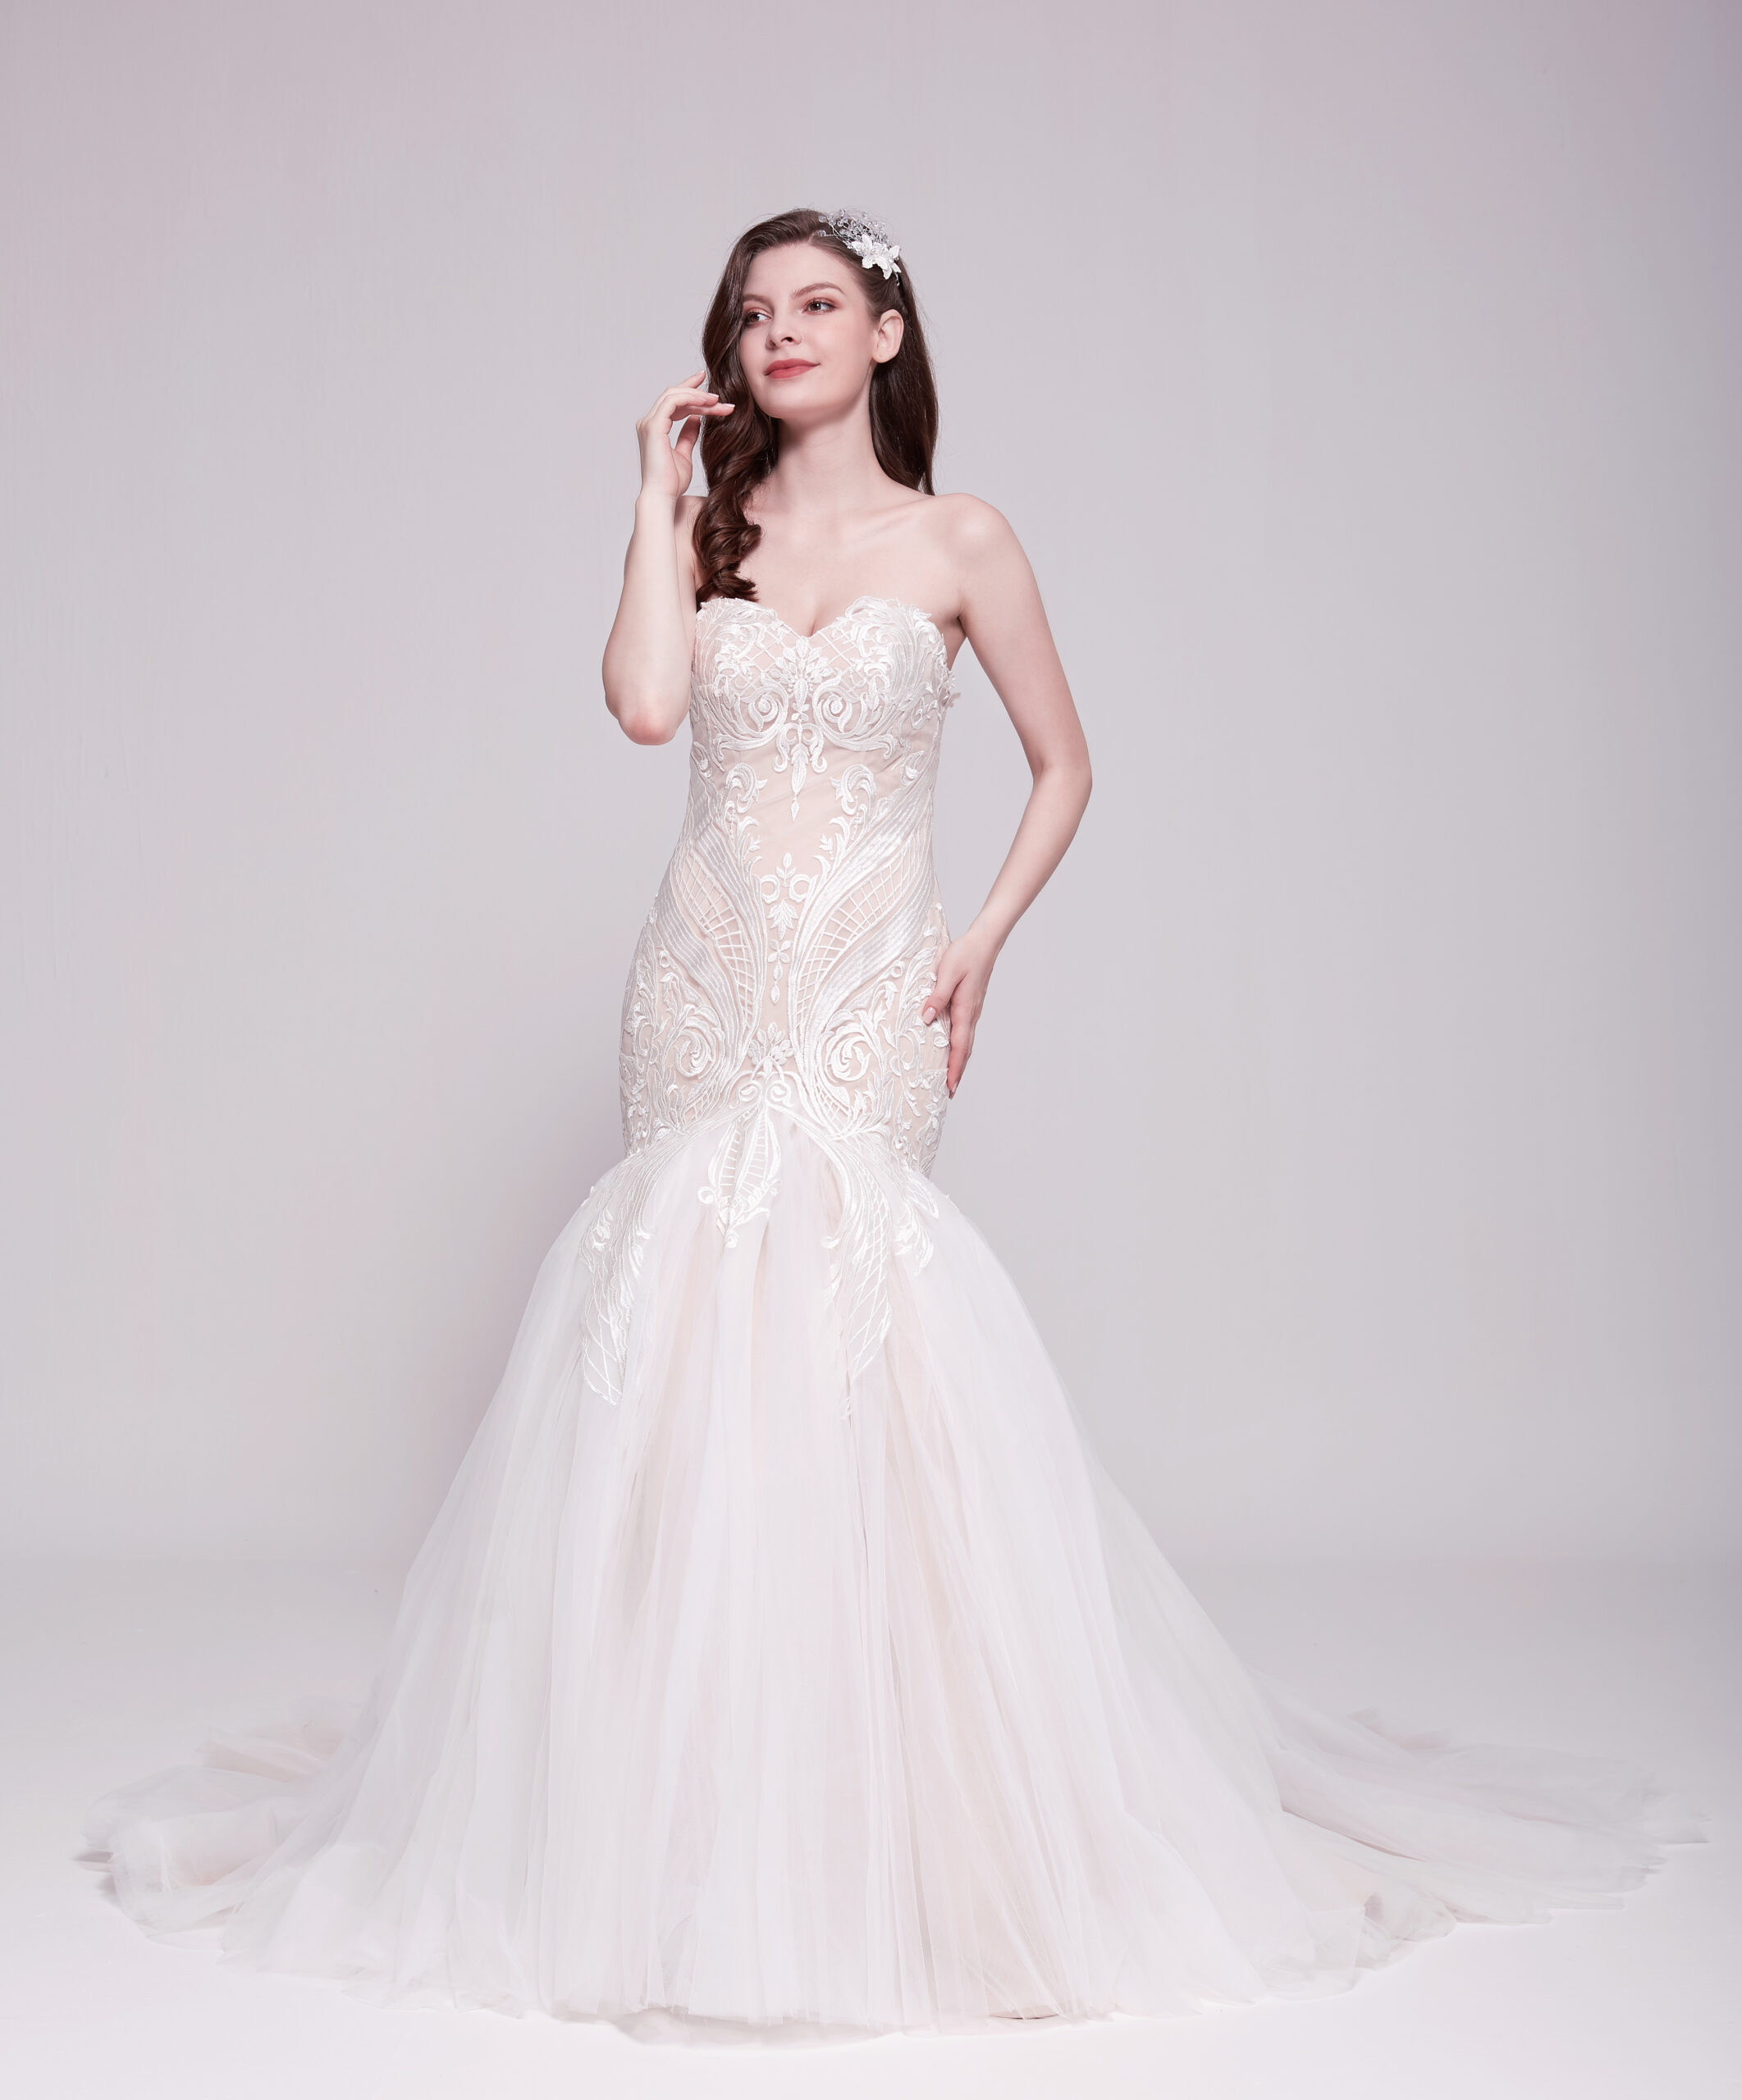 Paradise - A Sensational Embroidered Fishtail Wedding Dress, WED4LESS  OUTLETS ~ Wedding Dress & Bridesmaid Dress Outlets, Stockport, Newcastle, Burton